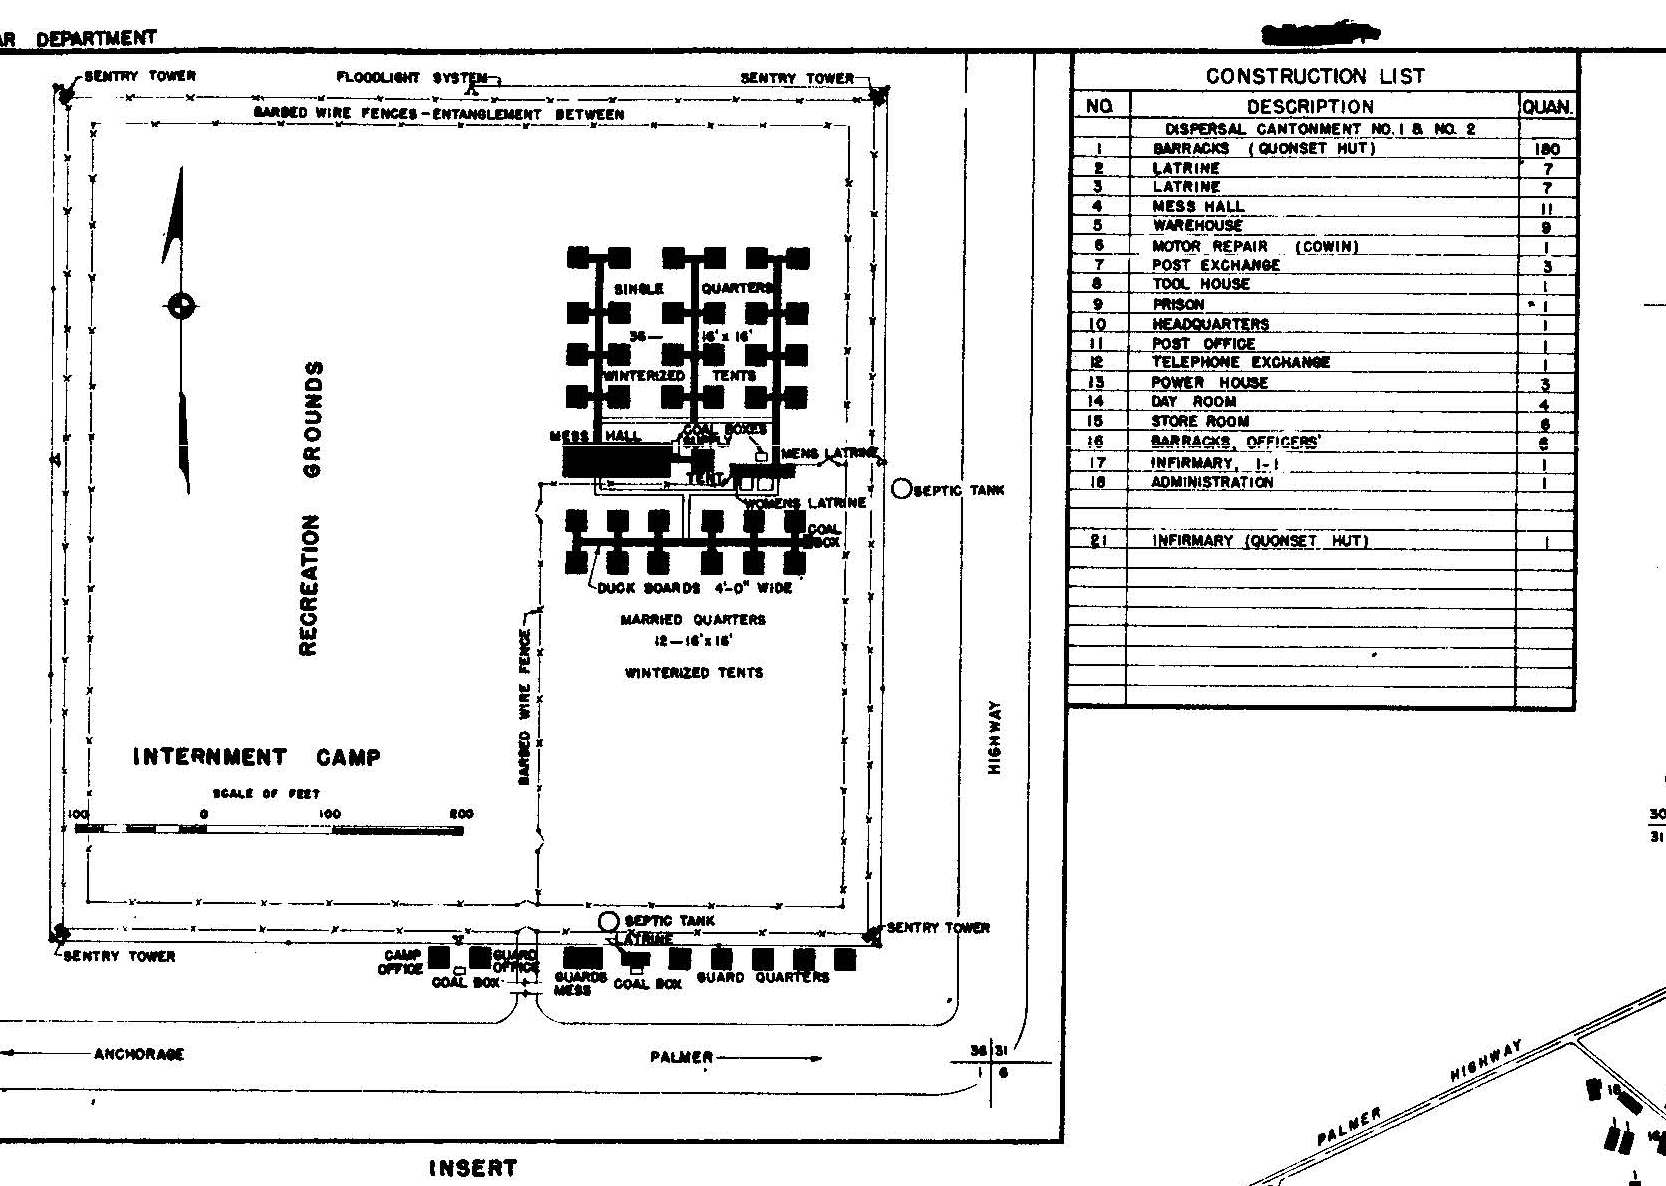 A schematic of the internment camp layout (Courtesy of Dr. Morgan Blanchard, Northern Land Use Research Alaska)